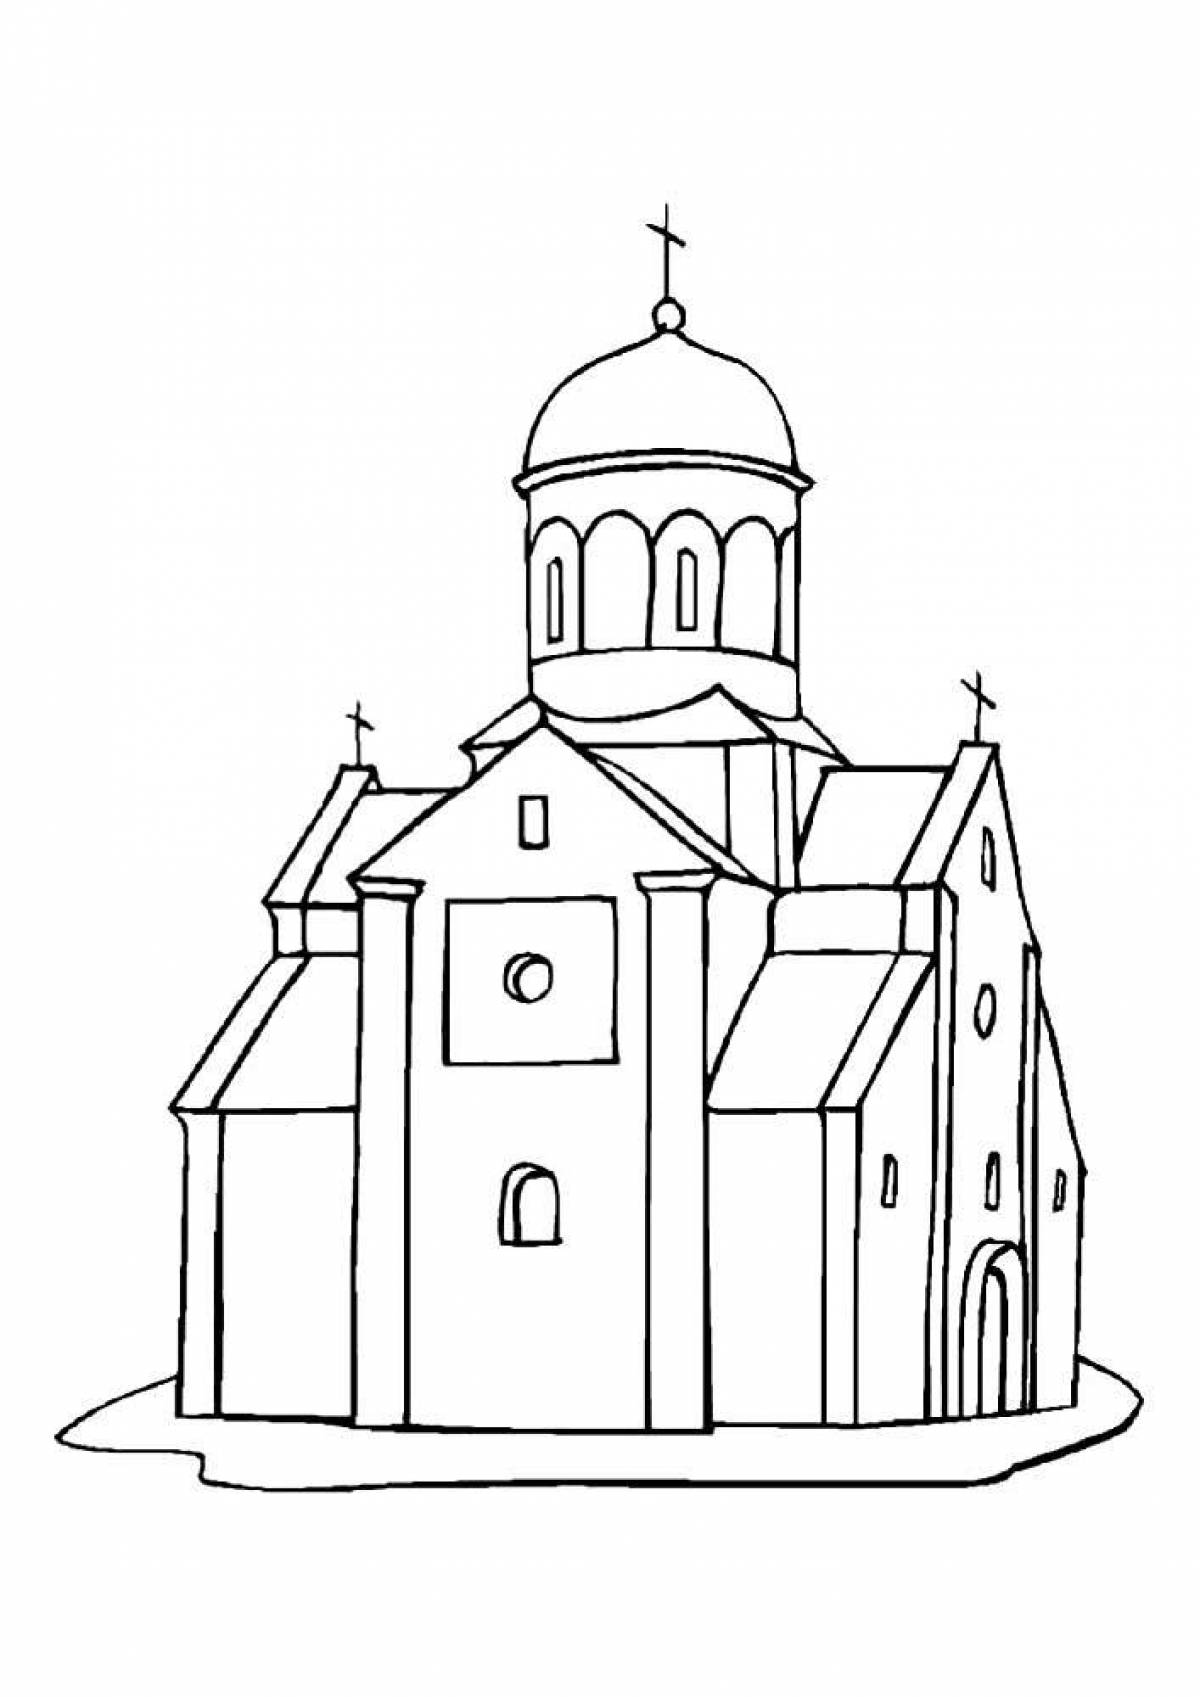 Great temple coloring page